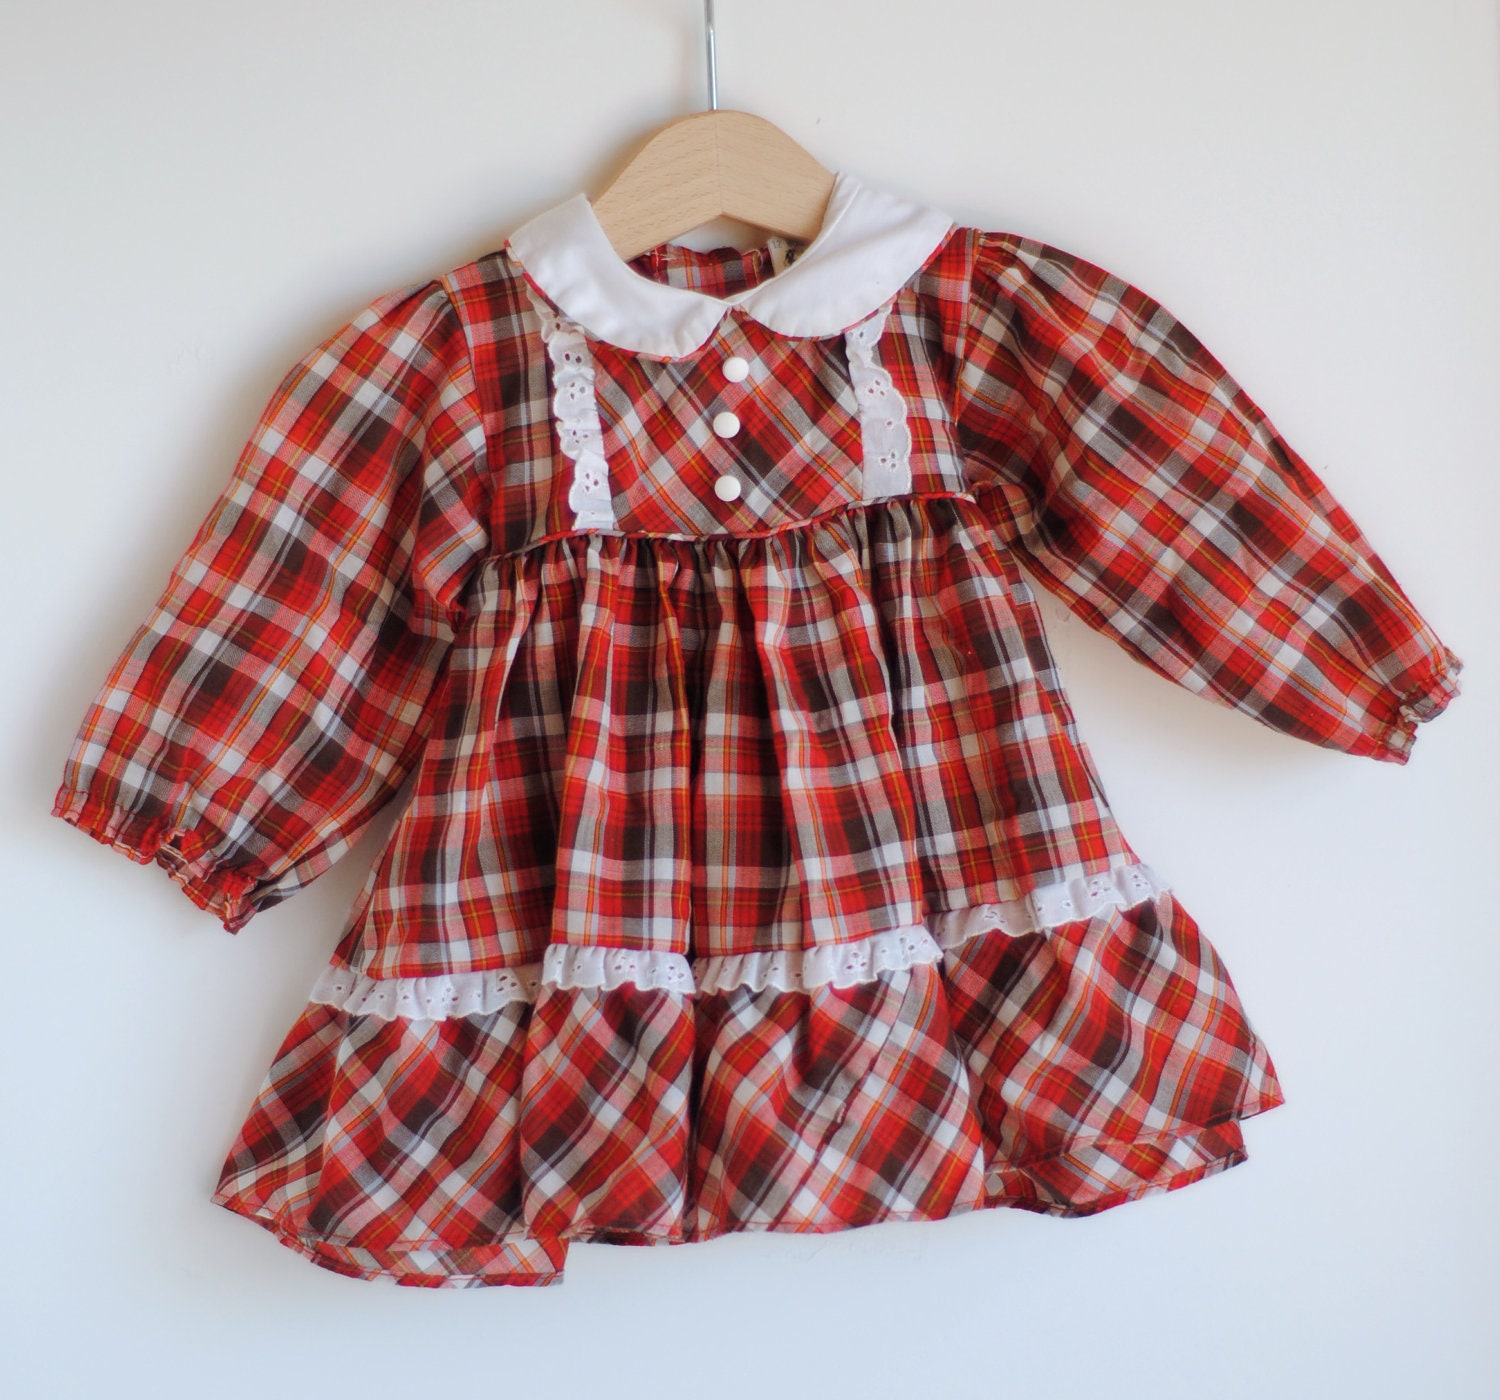 Vintage Baby Girl Dress - FALL Color Plaid (6m) - HartandSew